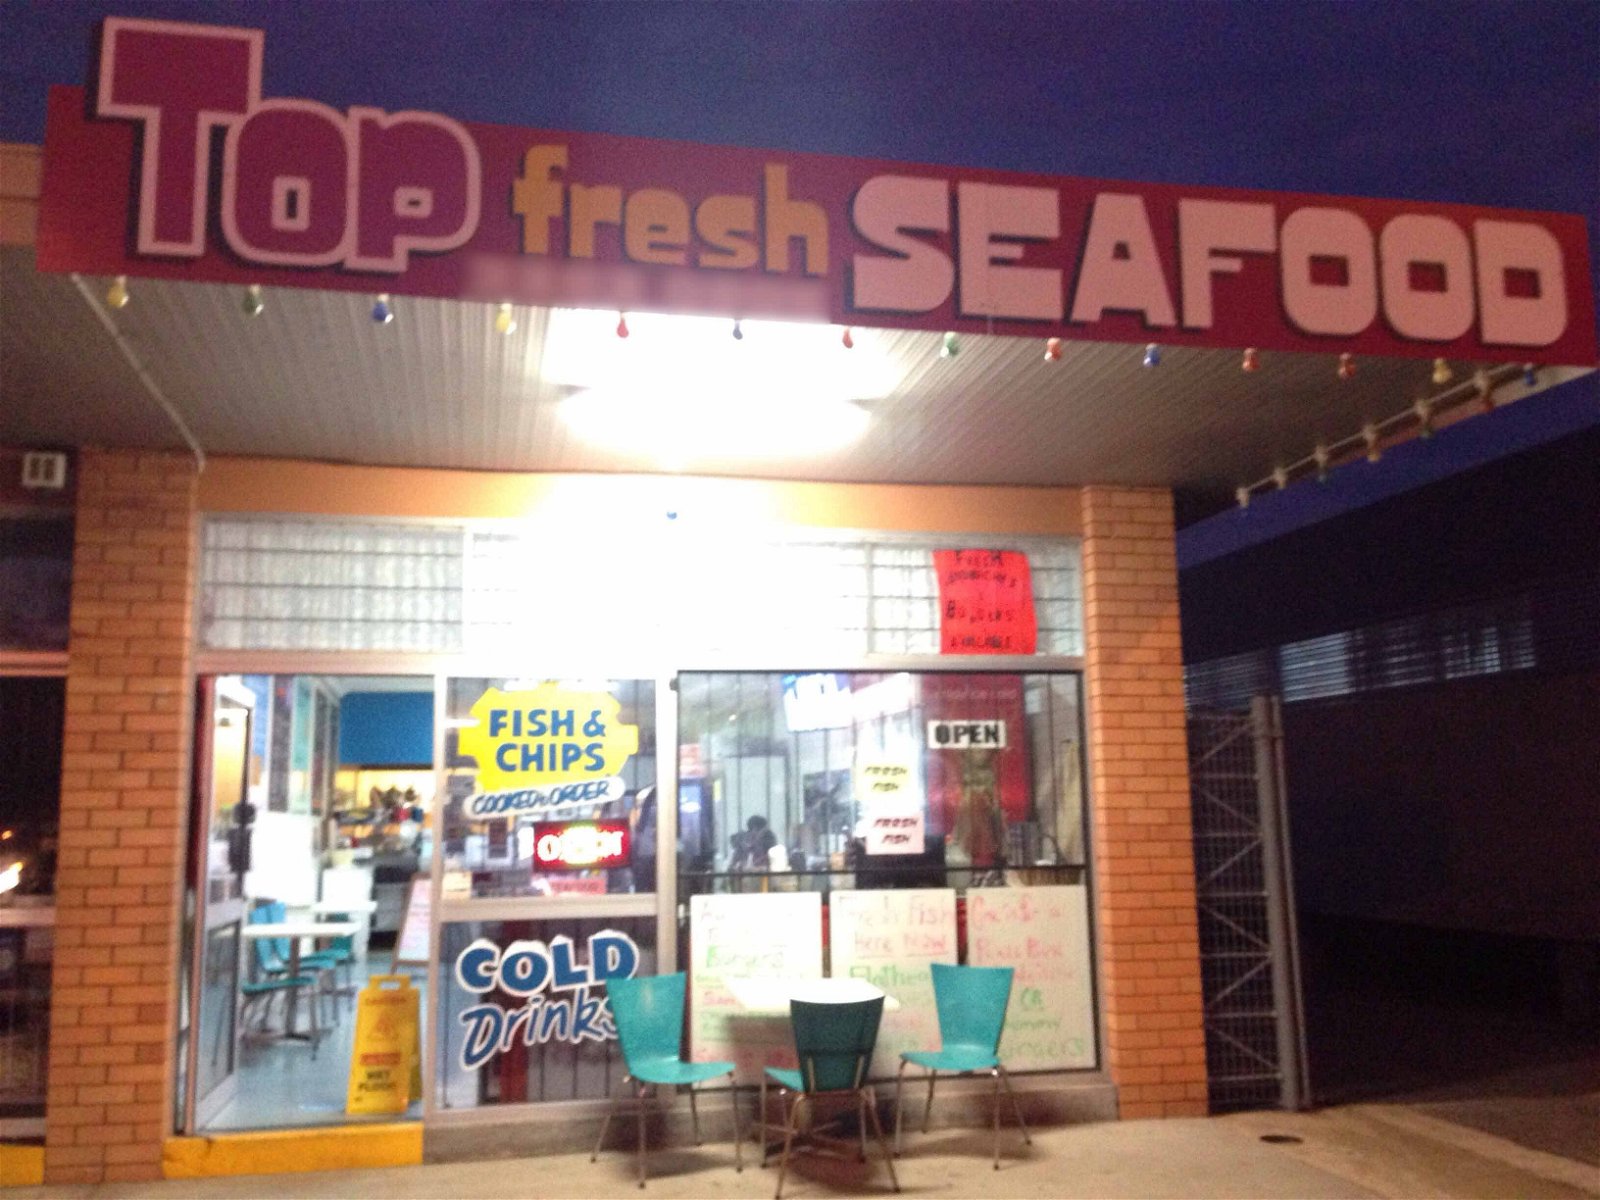 Top Fresh Seafood - Northern Rivers Accommodation